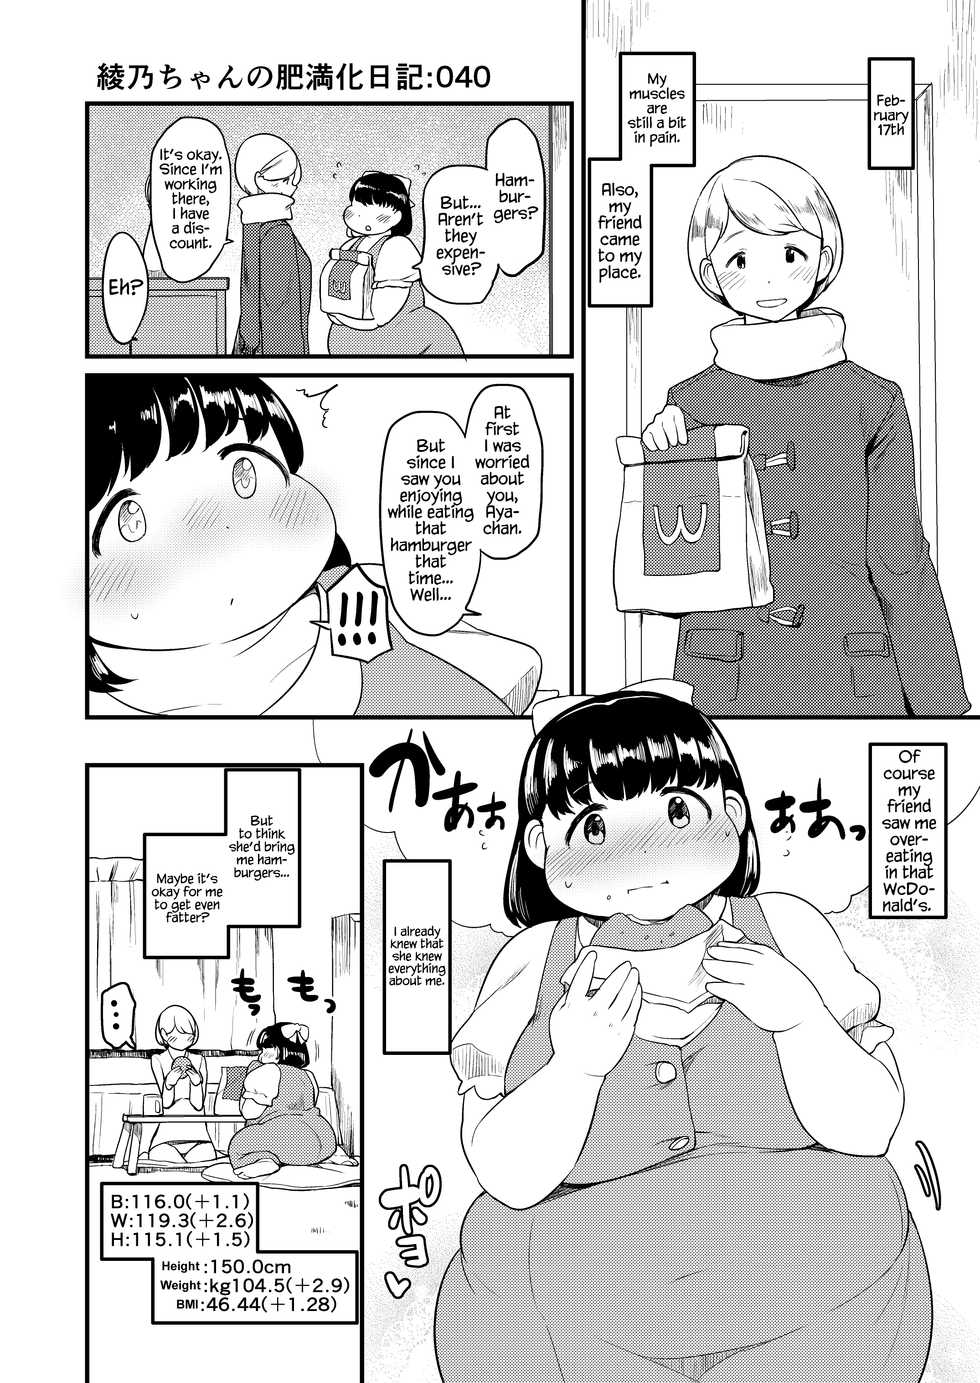 Ayano's Weight Gain Diary [English] - Page 40